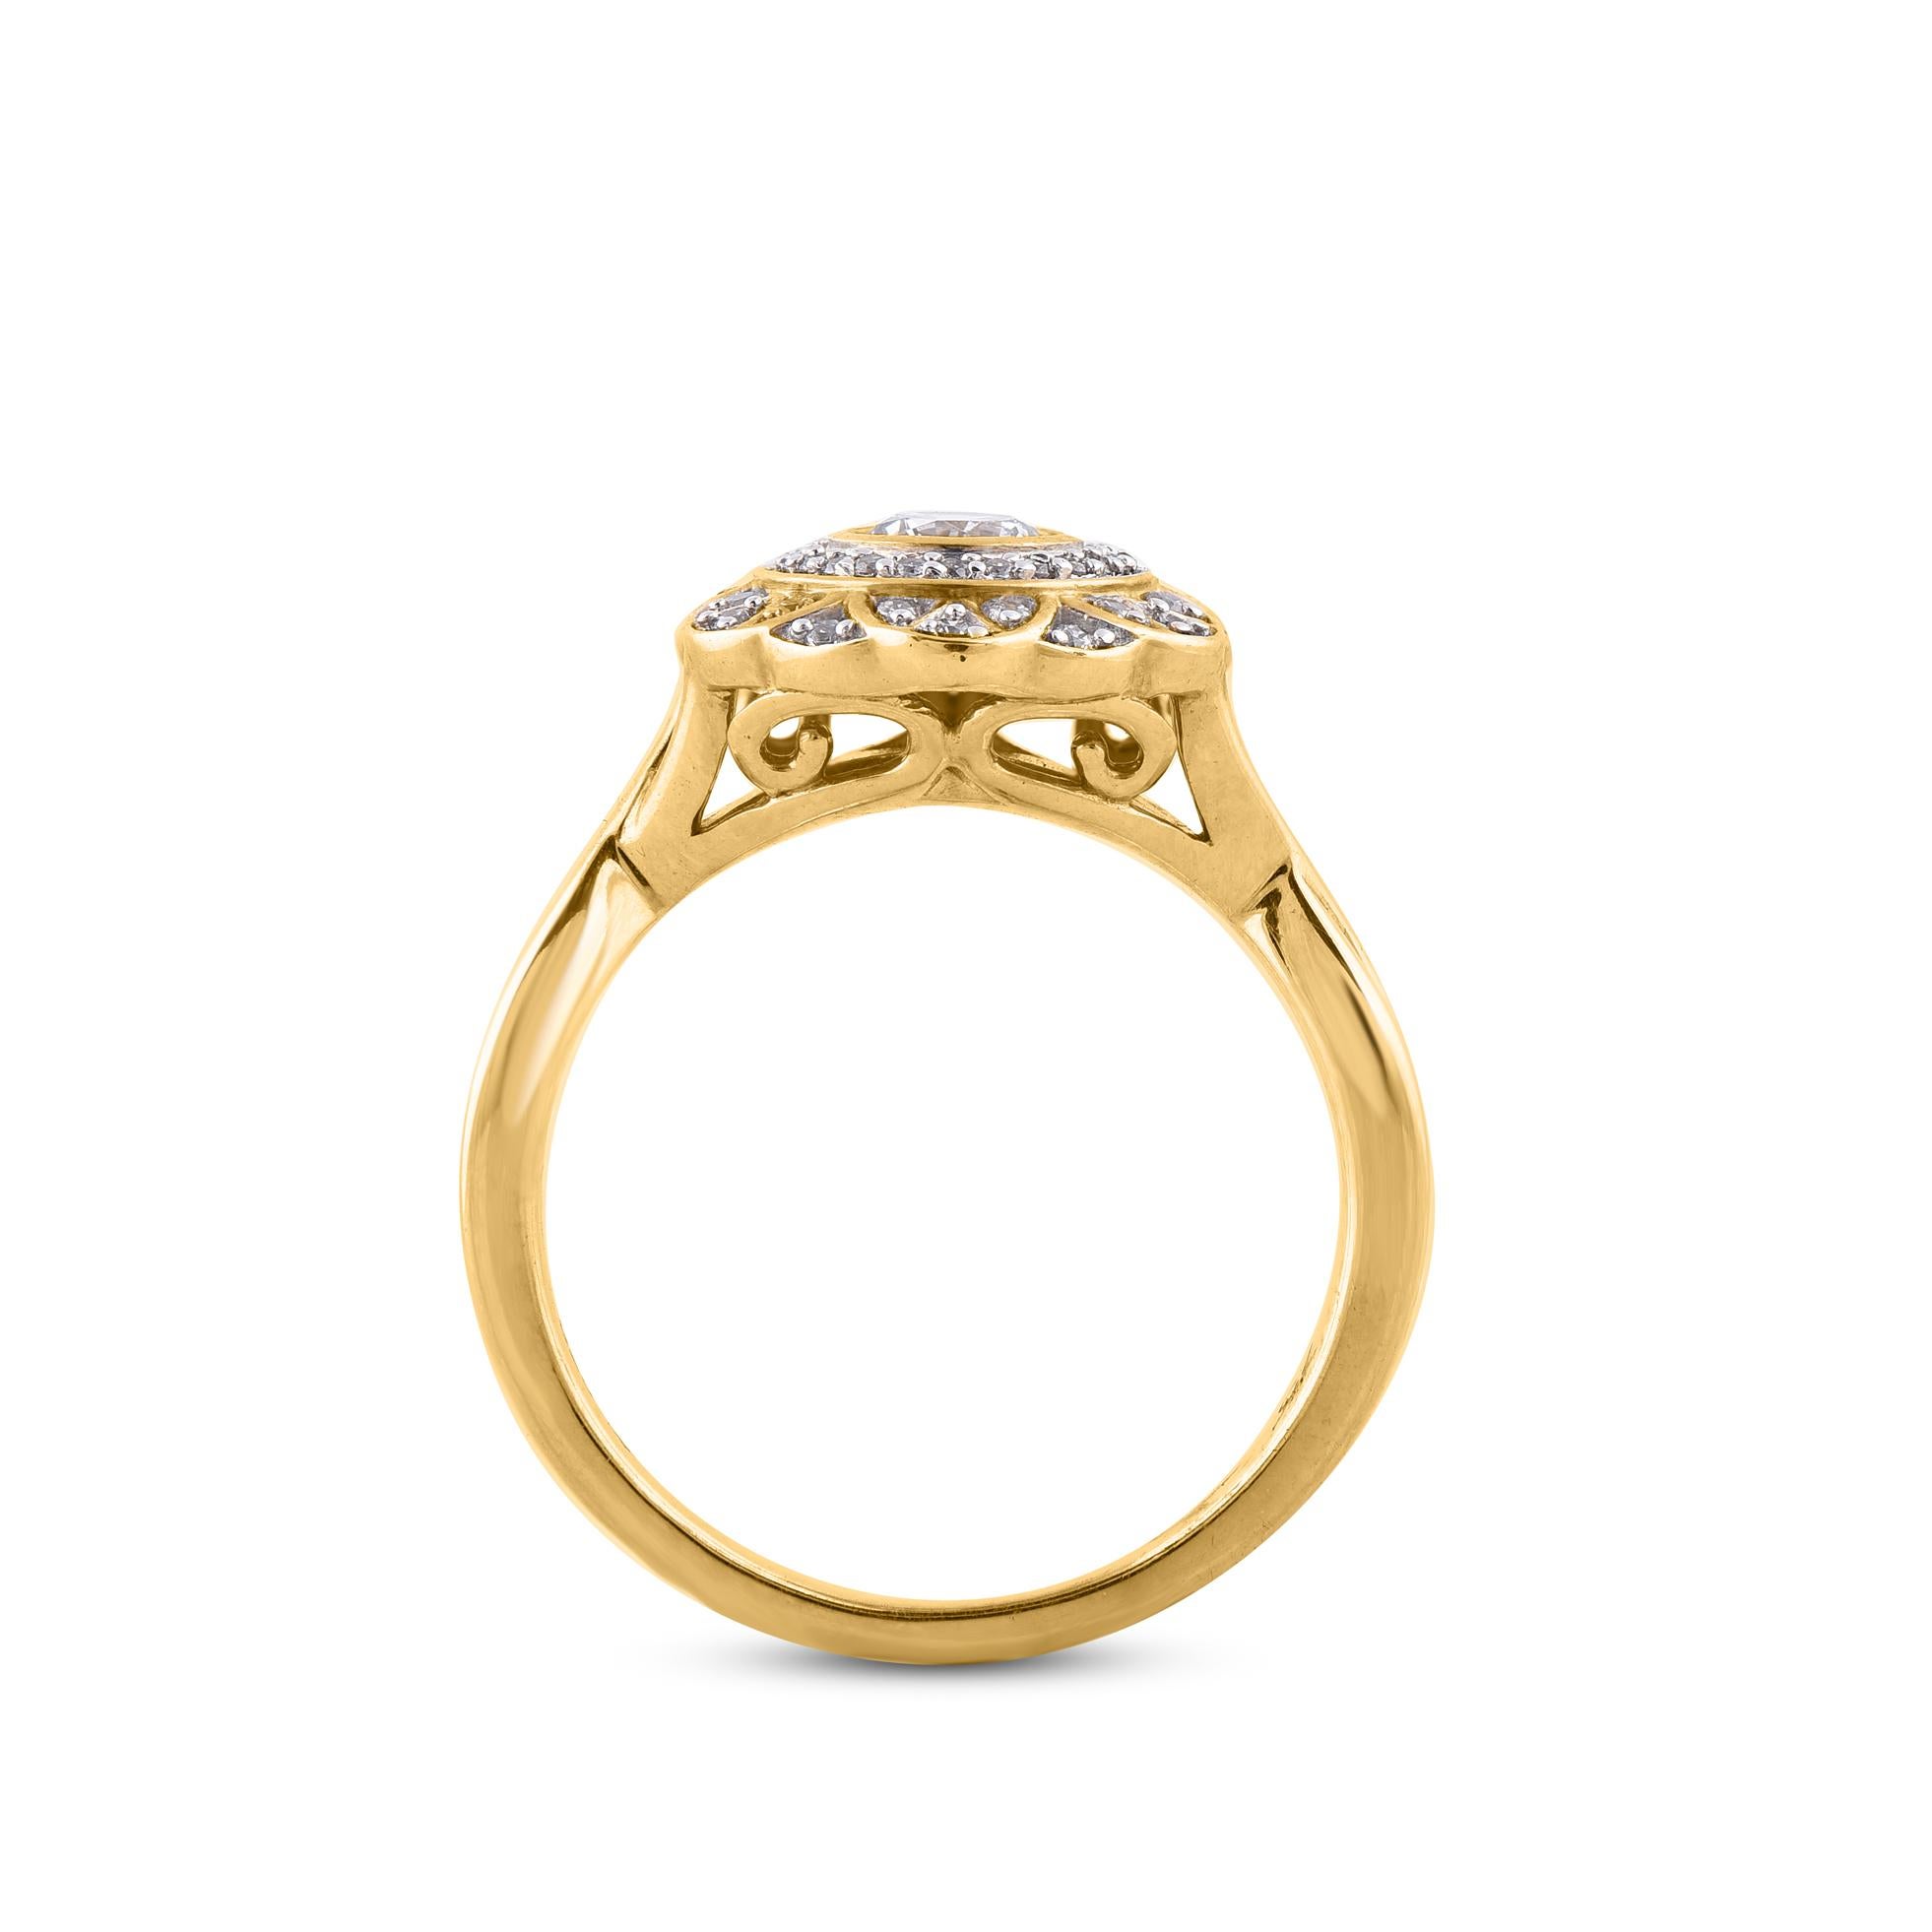 TJD 0.50 Carat Round Diamond 14 Karat Yellow Gold Vintage Wedding Ring In New Condition For Sale In New York, NY